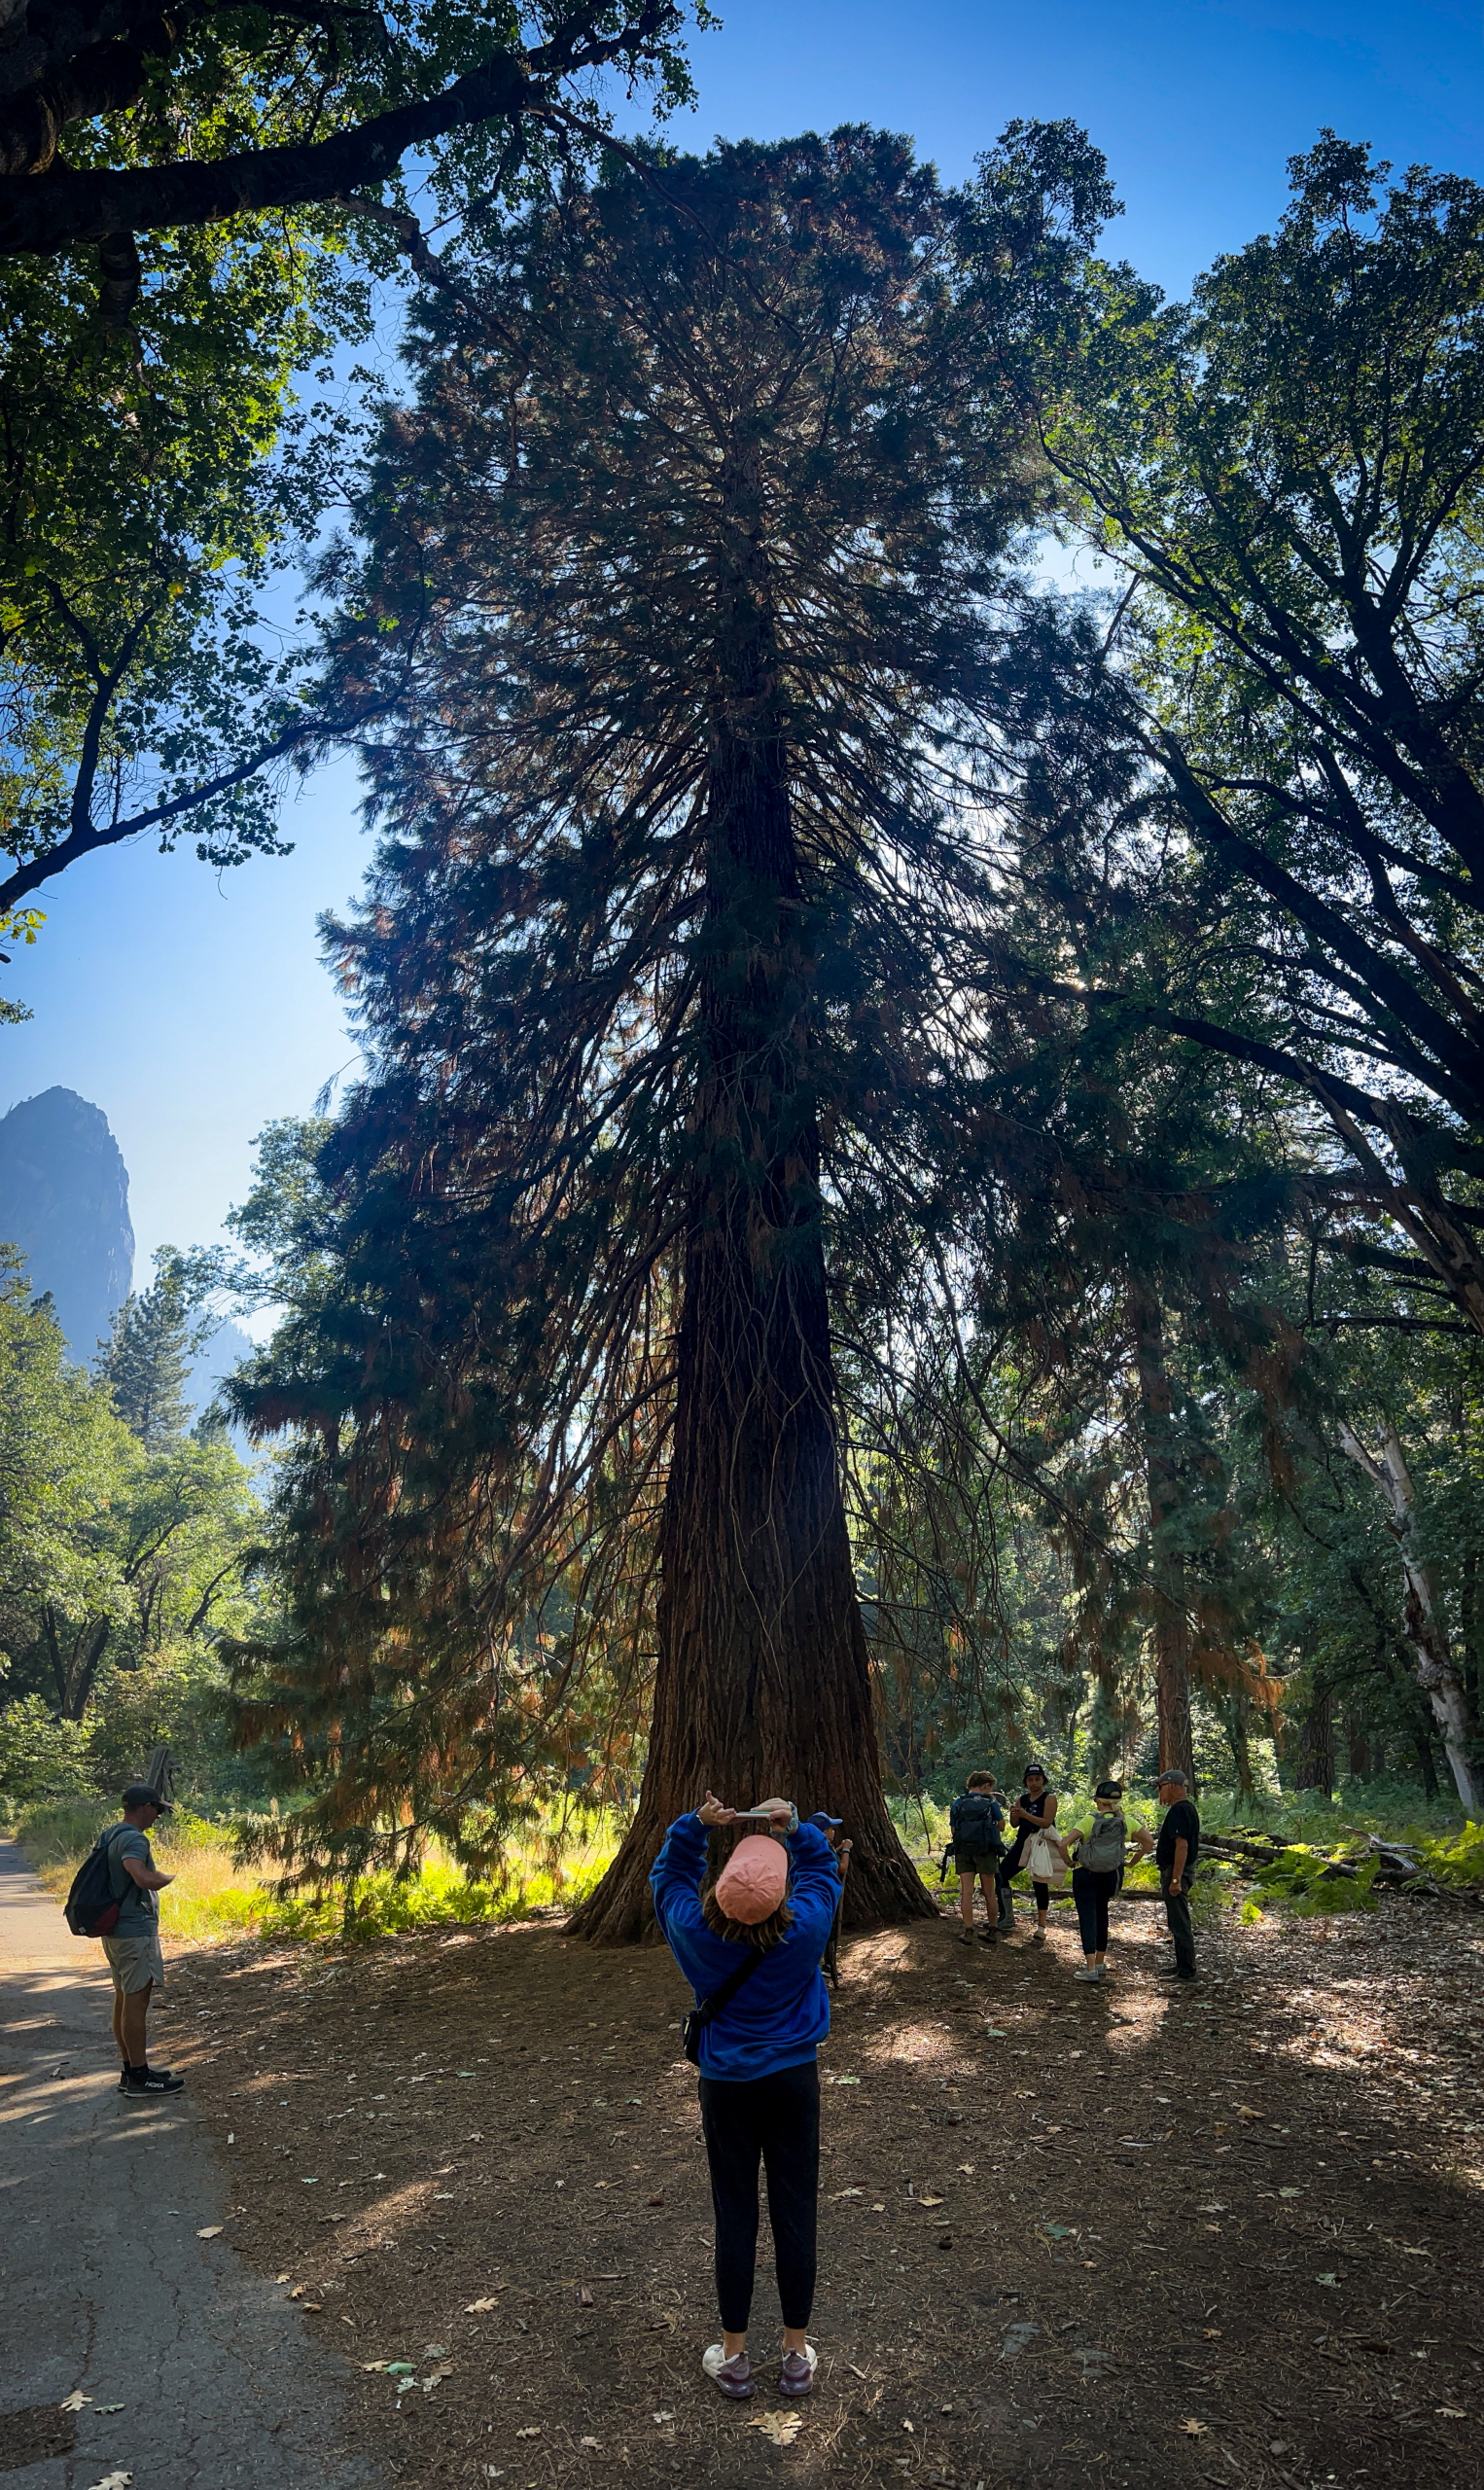 A large Sequoia gigantea in Yosemite National Park with a family taking pictures around it